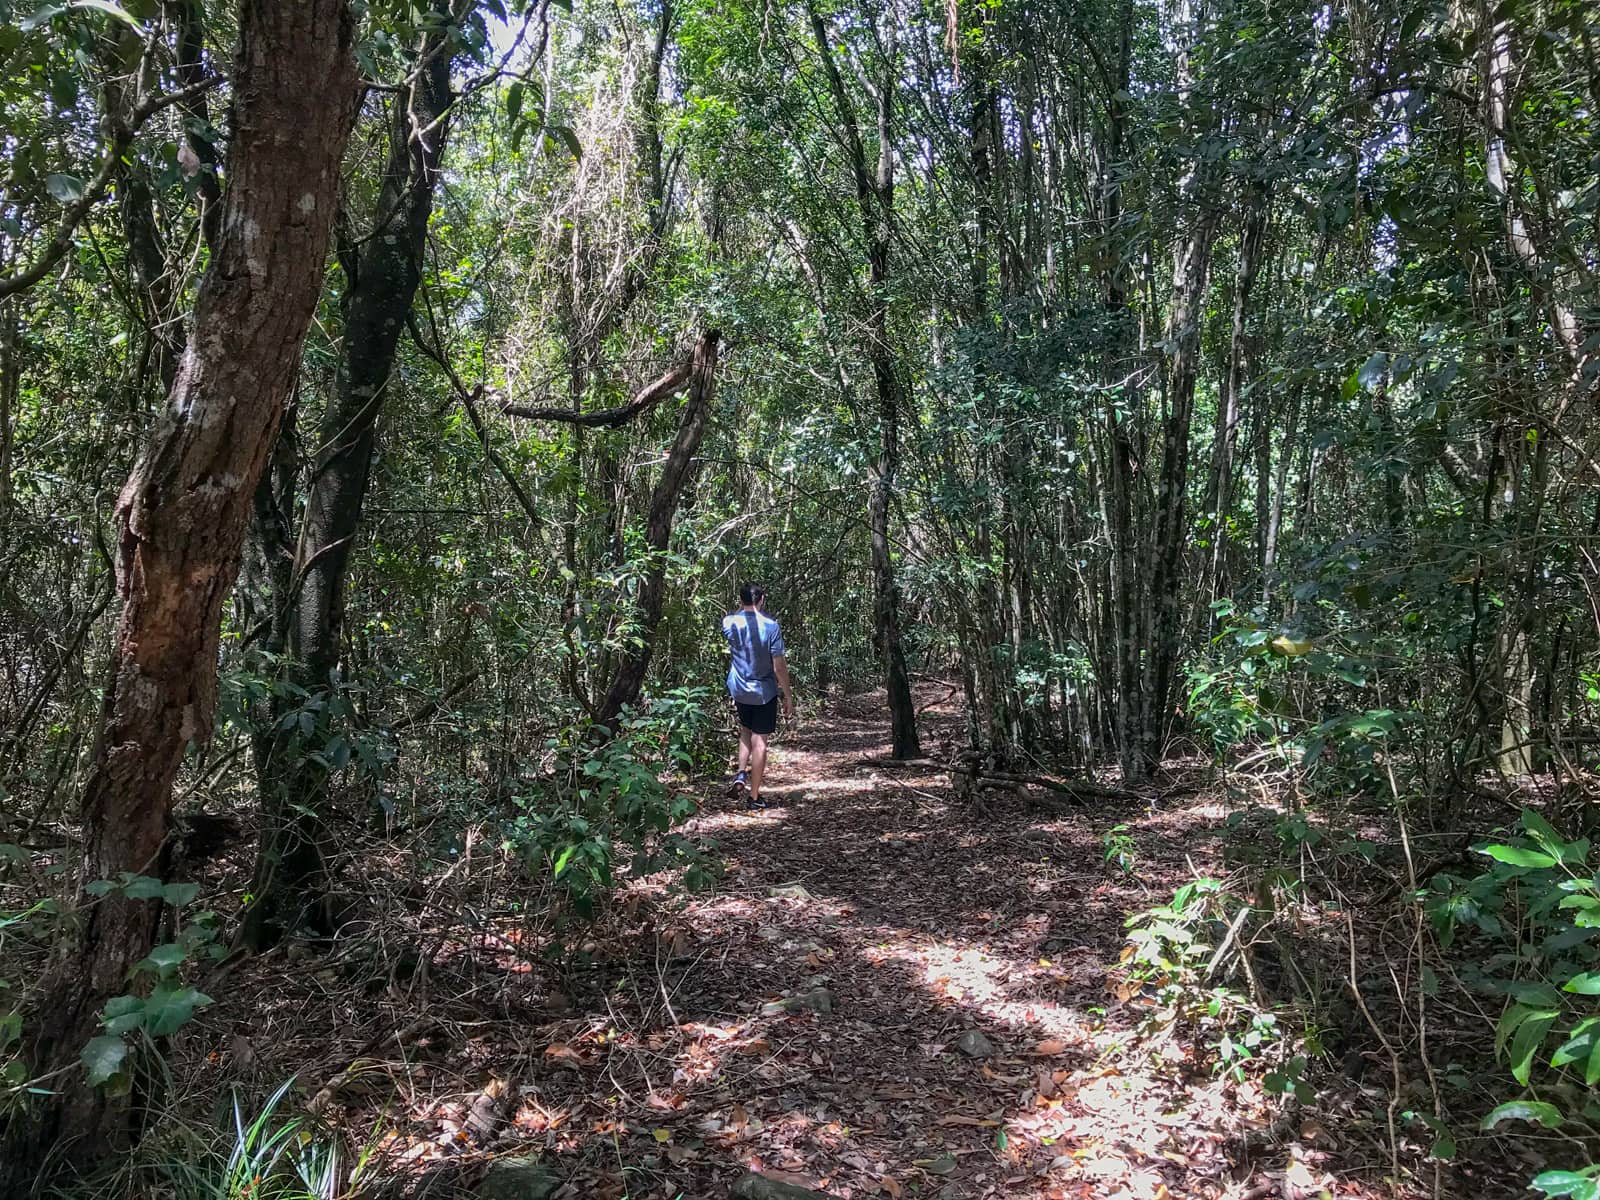 An area of bush with many trees, and little sunlight showing on the ground through the trees. A man just ahead is walking with his back to the camera.